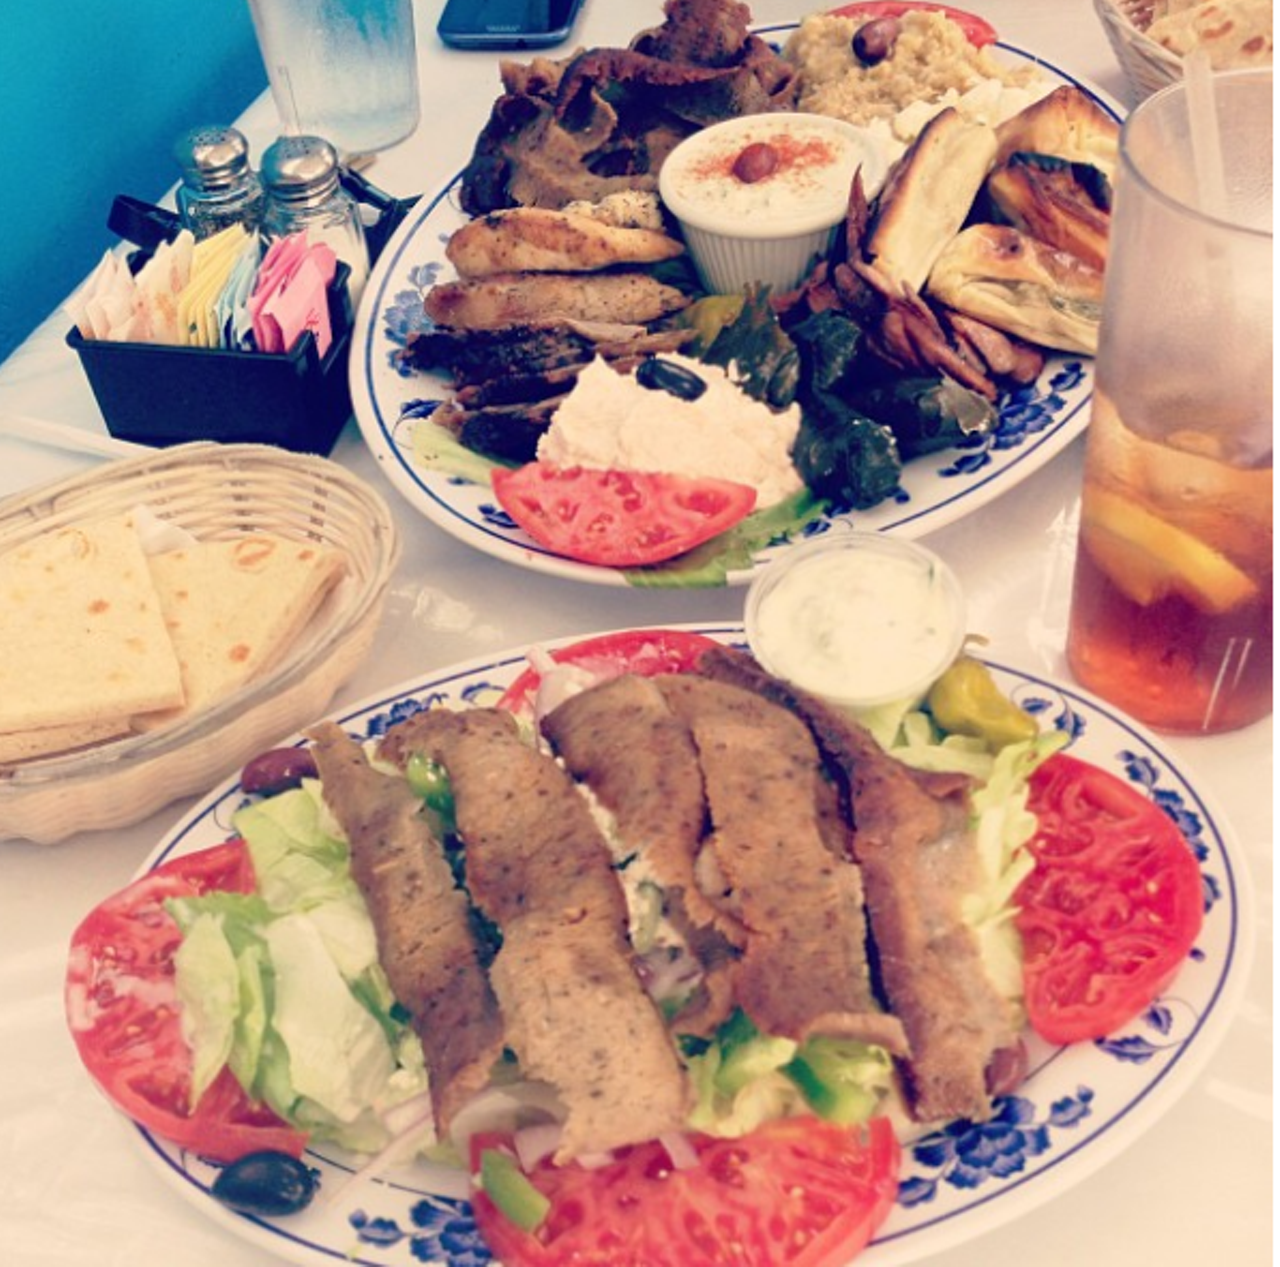 Mezze platter from The Greek Corner
1600 N. Orange Ave., 407-228-0303
With a little bit of everything, this combo has something for everyone at the table, including roast lamb, gyro, taramosalata, tzatziki and pita, roast chicken and stuffed grape leaves.
Photo via waltsapprentice/Instagram